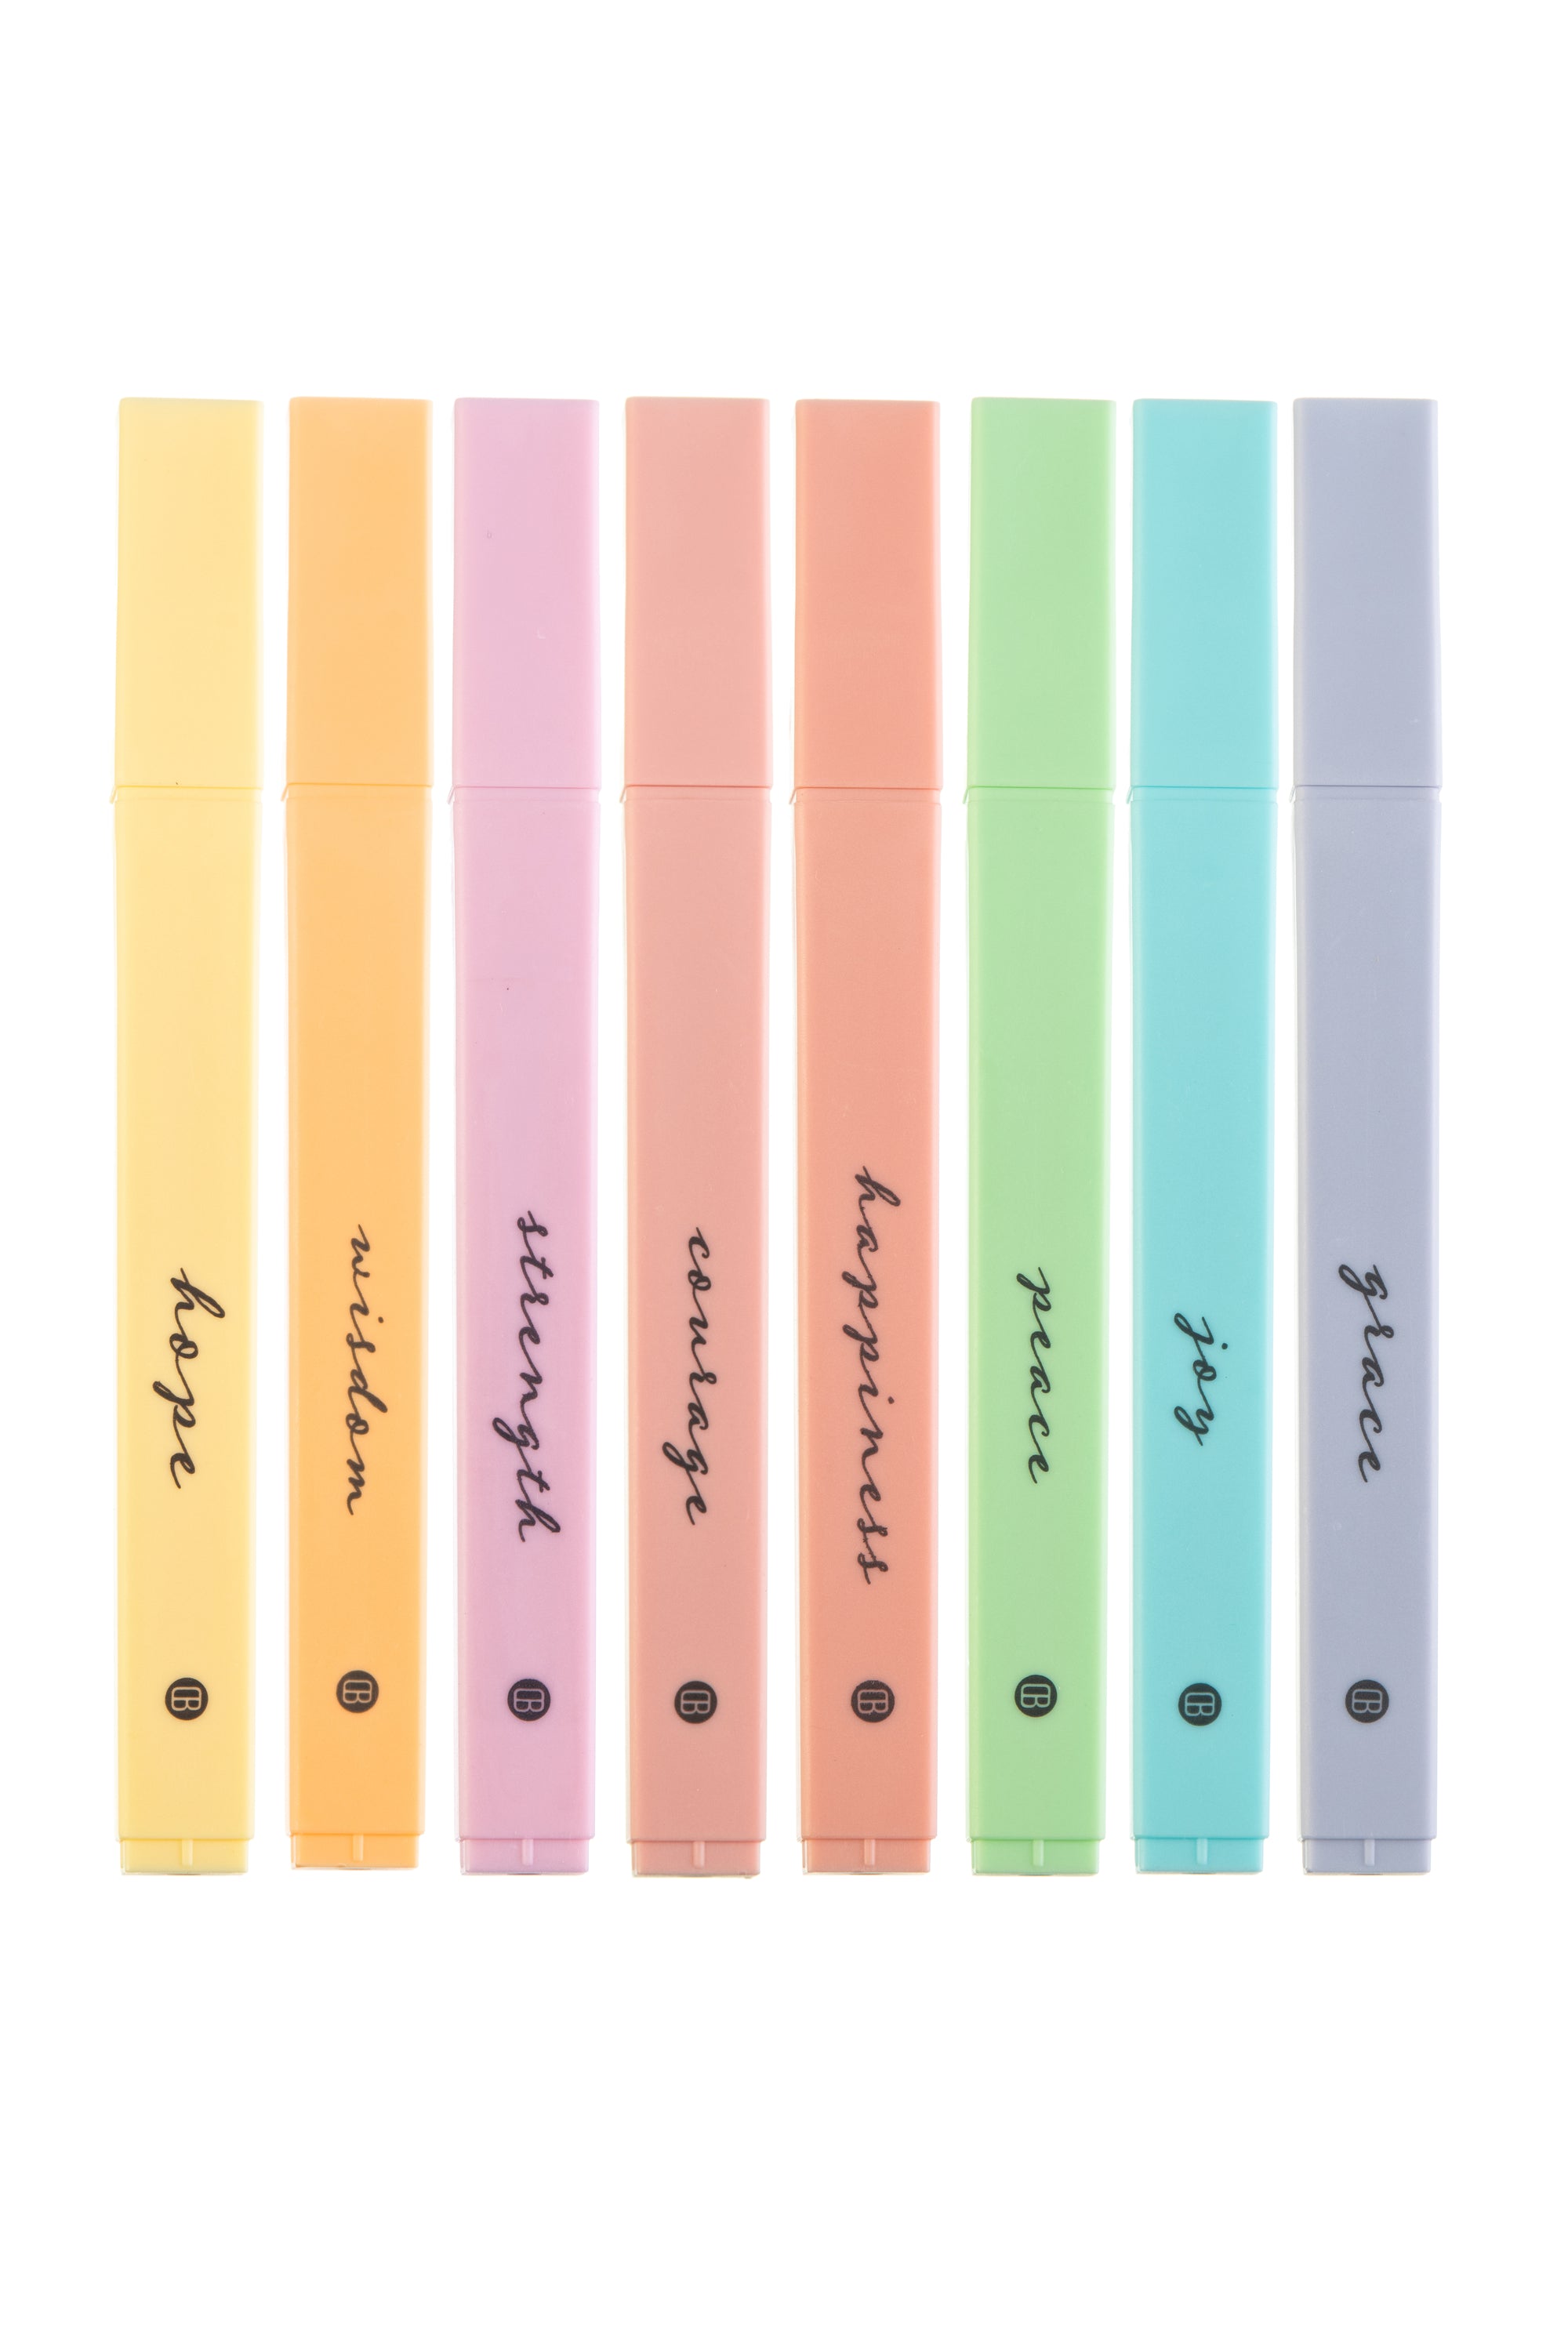 Pastel Highlighters Aesthetic Cute Bible Highlighters And Pens No